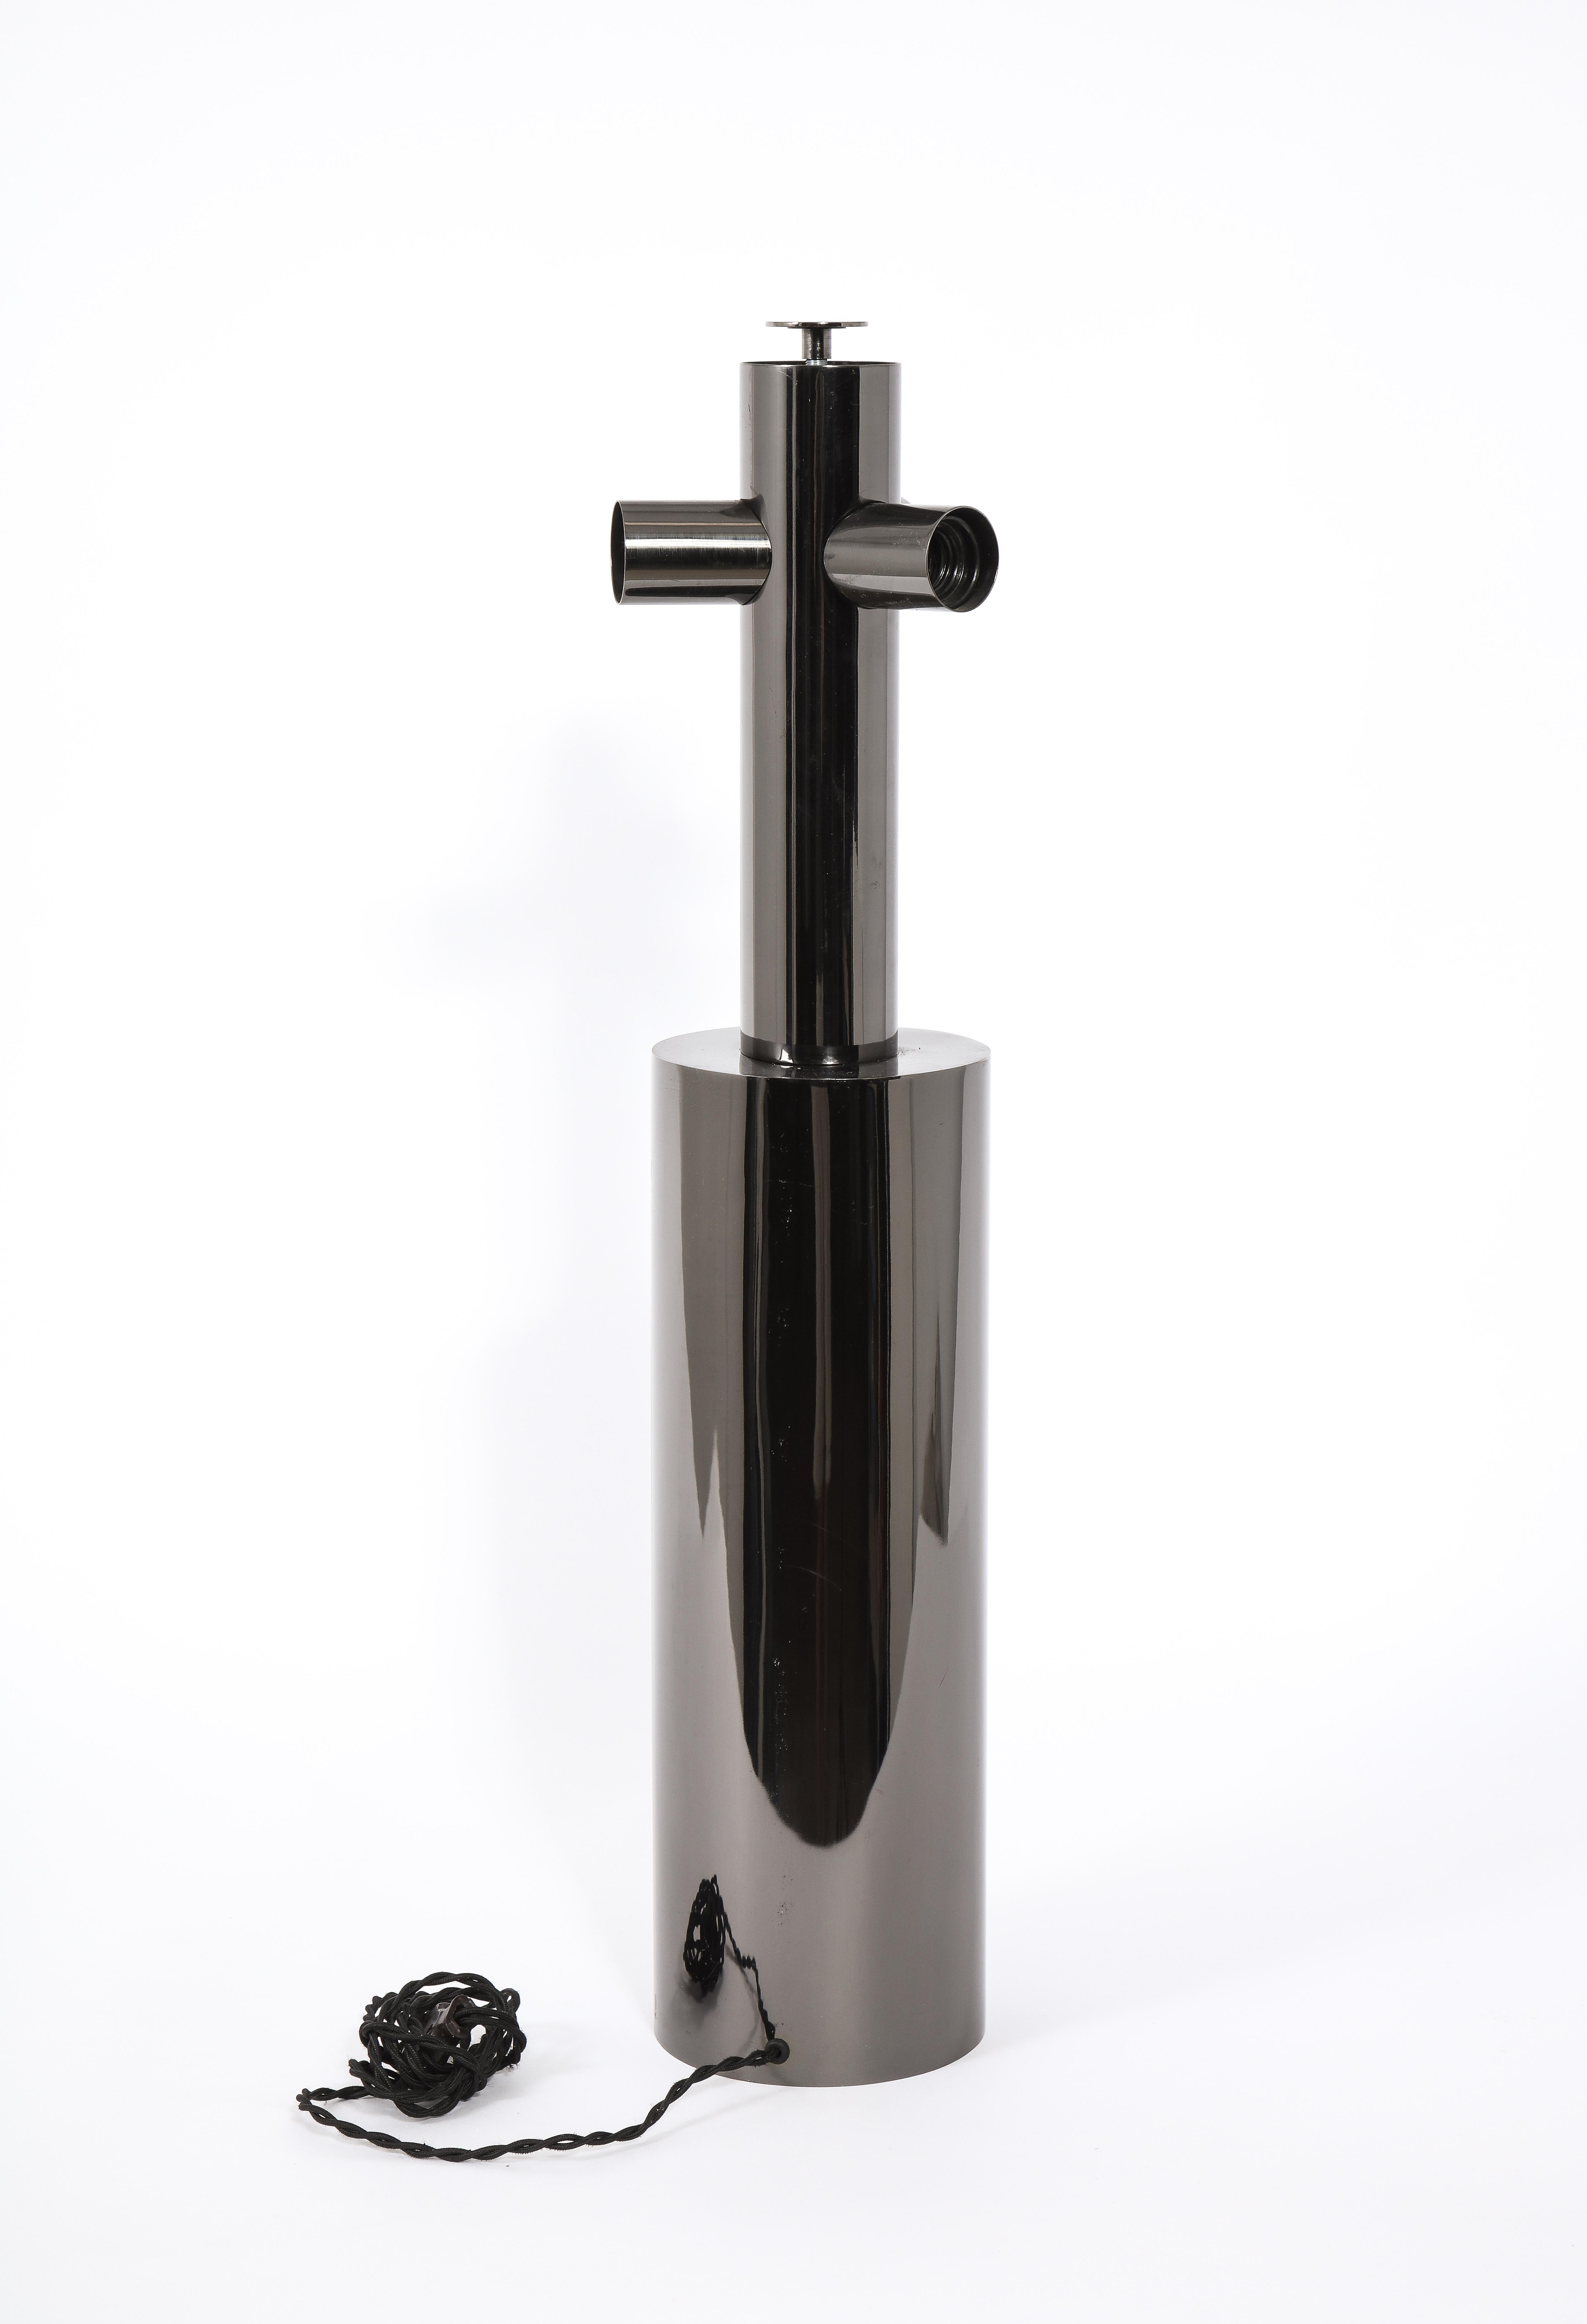 Cylindrical Table Lamp in Black Nickel, France, 1970's For Sale 1